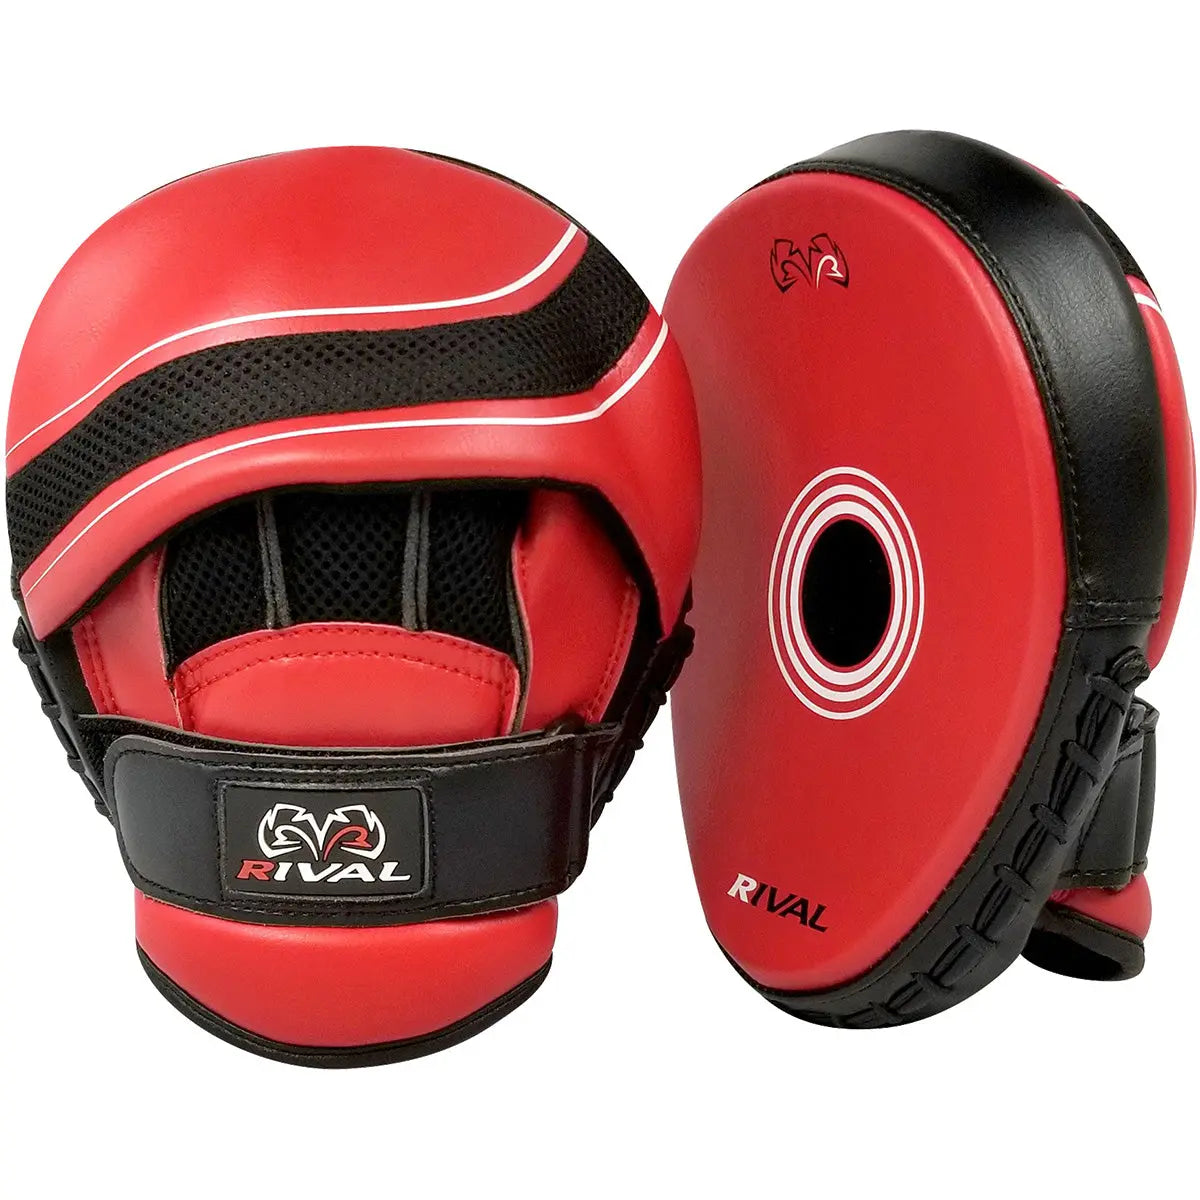 RIVAL Boxing RPM1 Ultra Punch Mitts RIVAL